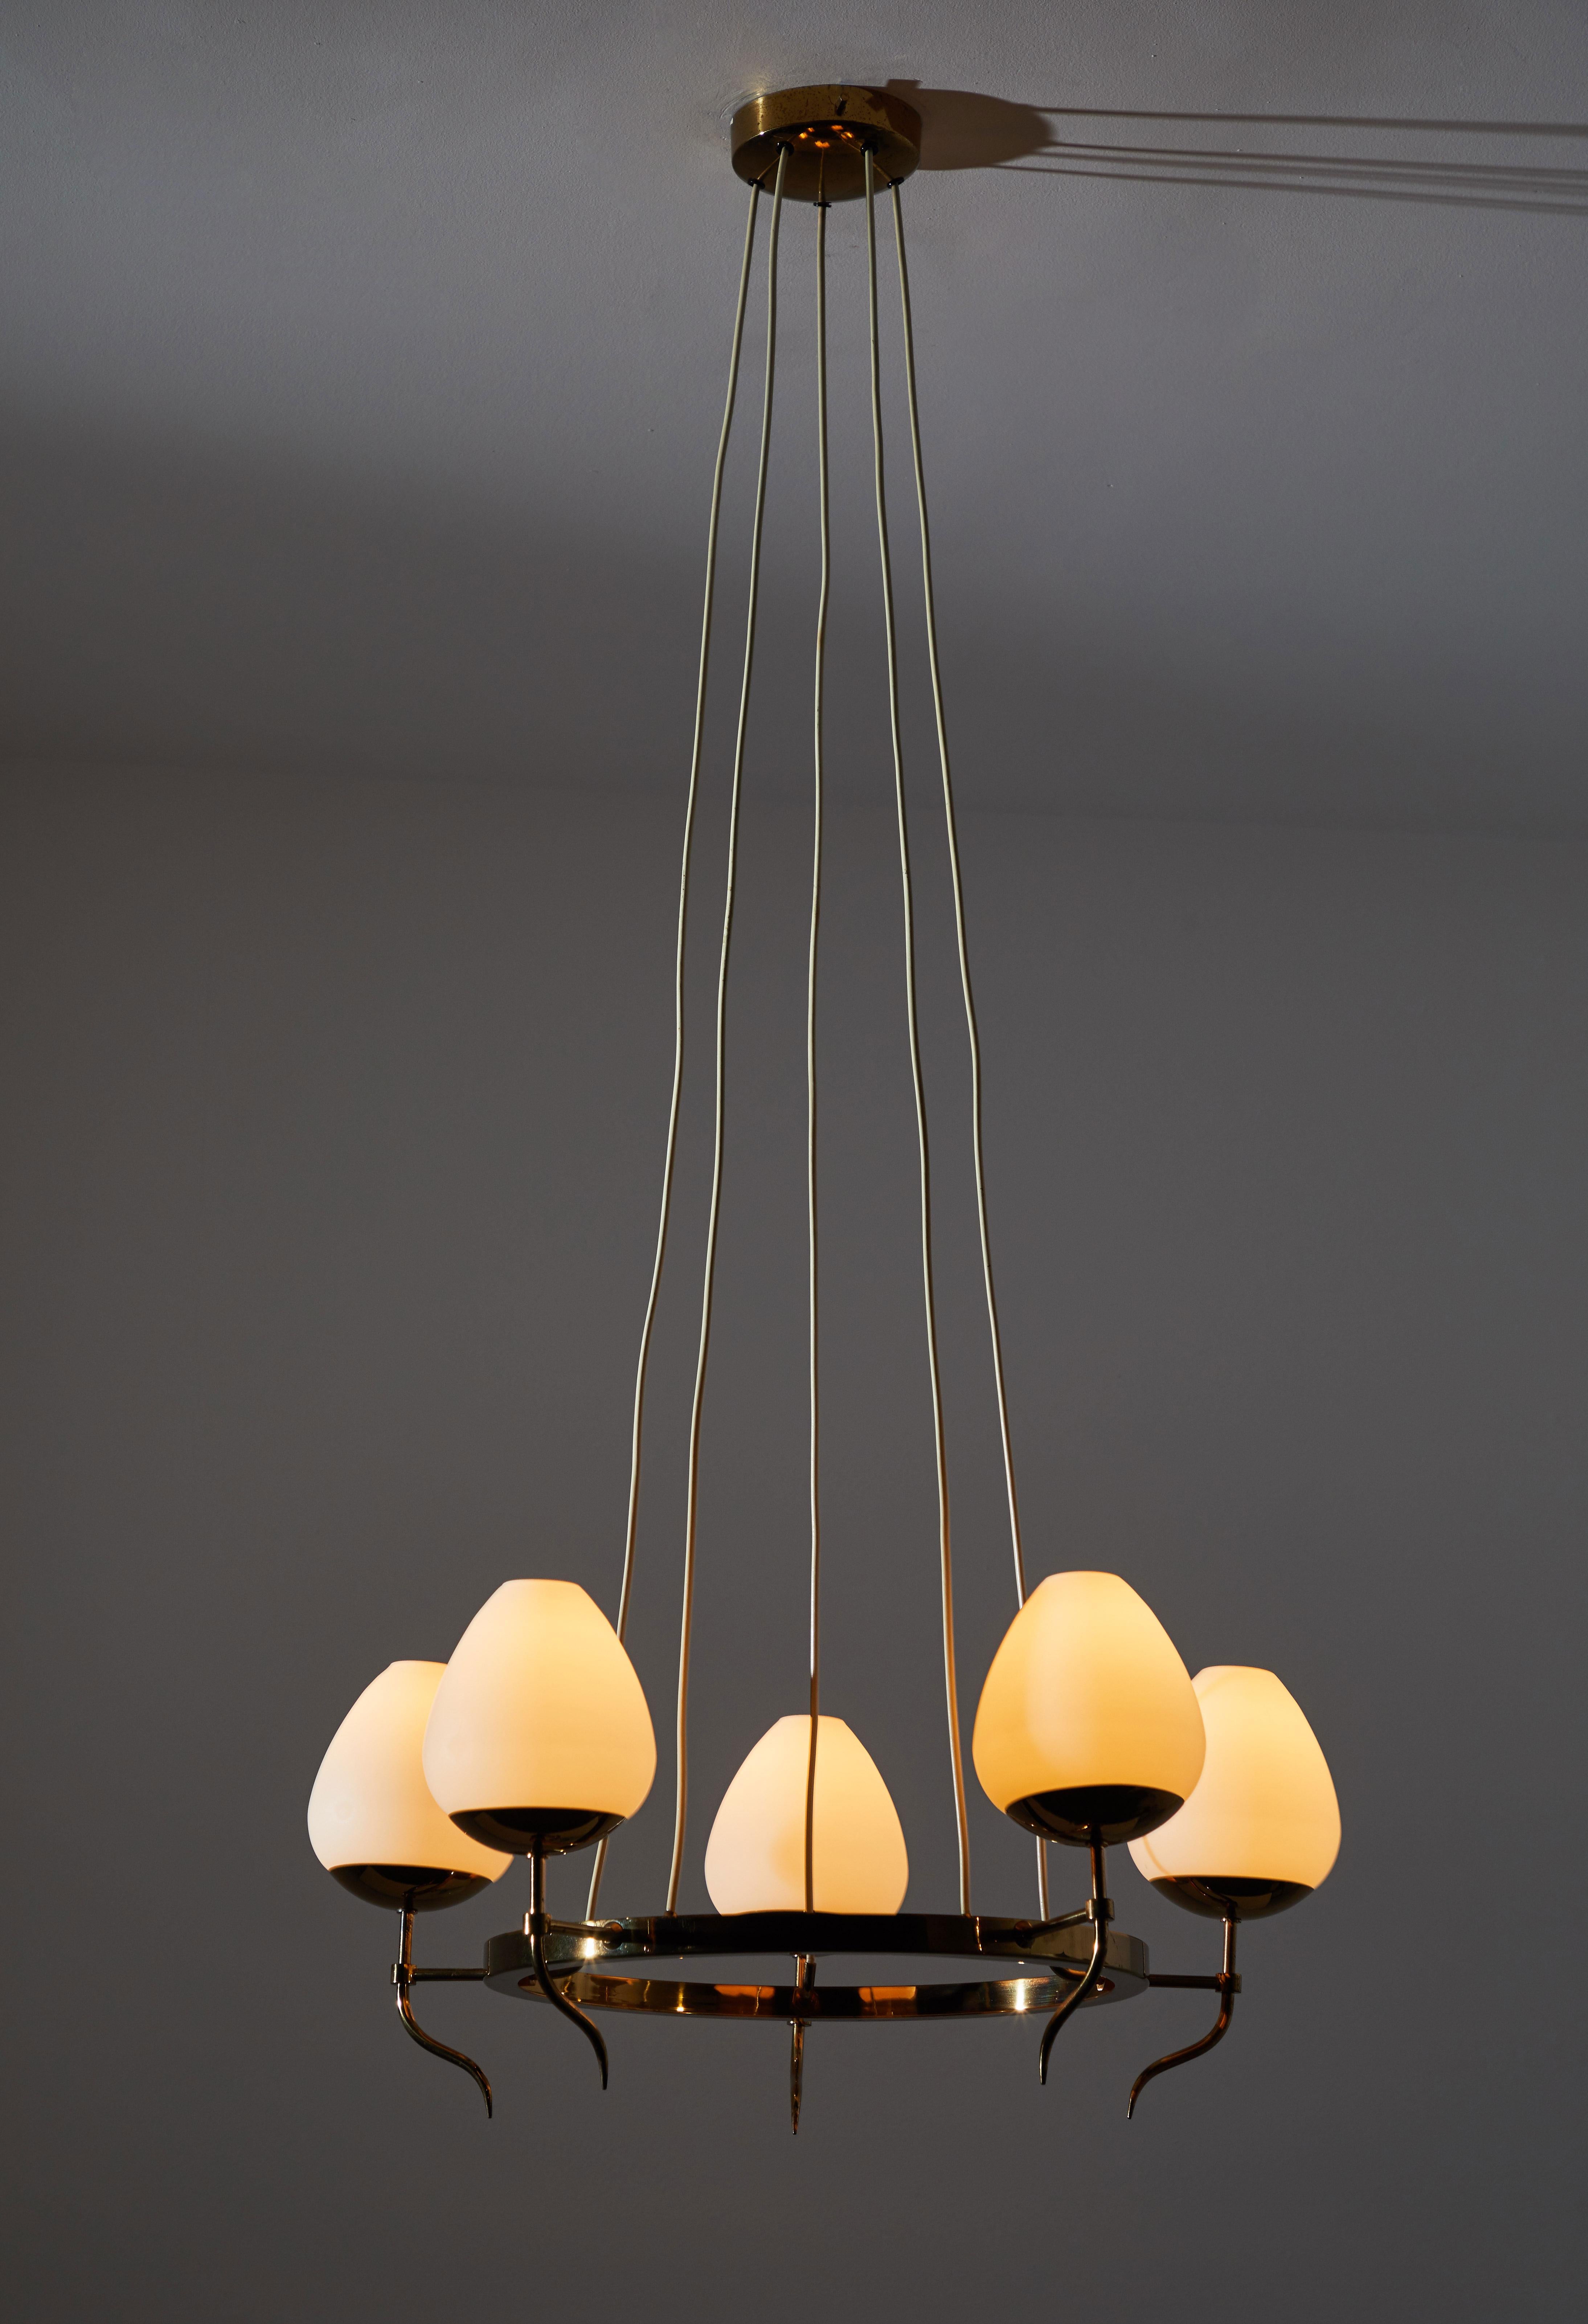 Five globe chandelier by Stilnovo. Manufactured in Italy circa 1950s. Brass with brush satin glass diffusers. Original canopy, custom ceiling plate. Rewired for US junction boxes. Takes five E27 25w maximum bulbs.